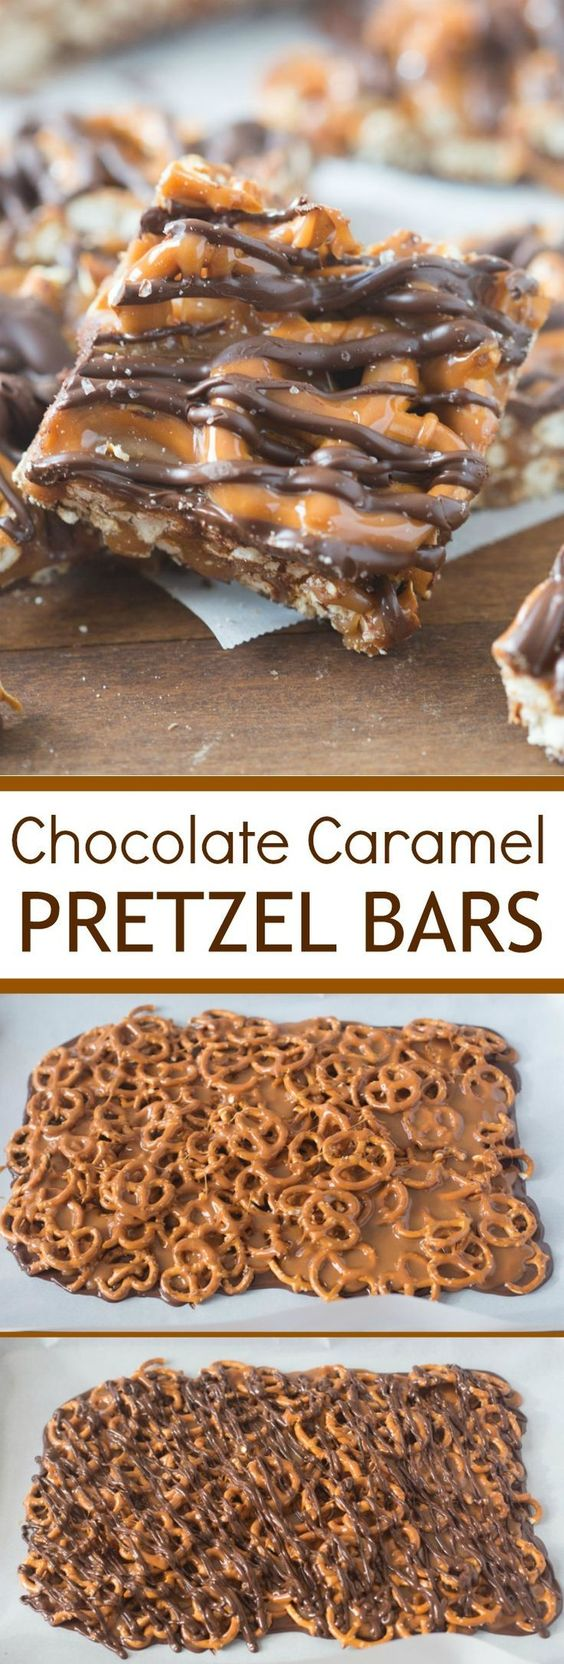 The Best Easy Desserts Bars Recipes – Favorite New Plus Classic Simple Bar Cookies and Quick Big Batch Party Treats Bars for a Crowd -   19 desserts Simple easy ideas